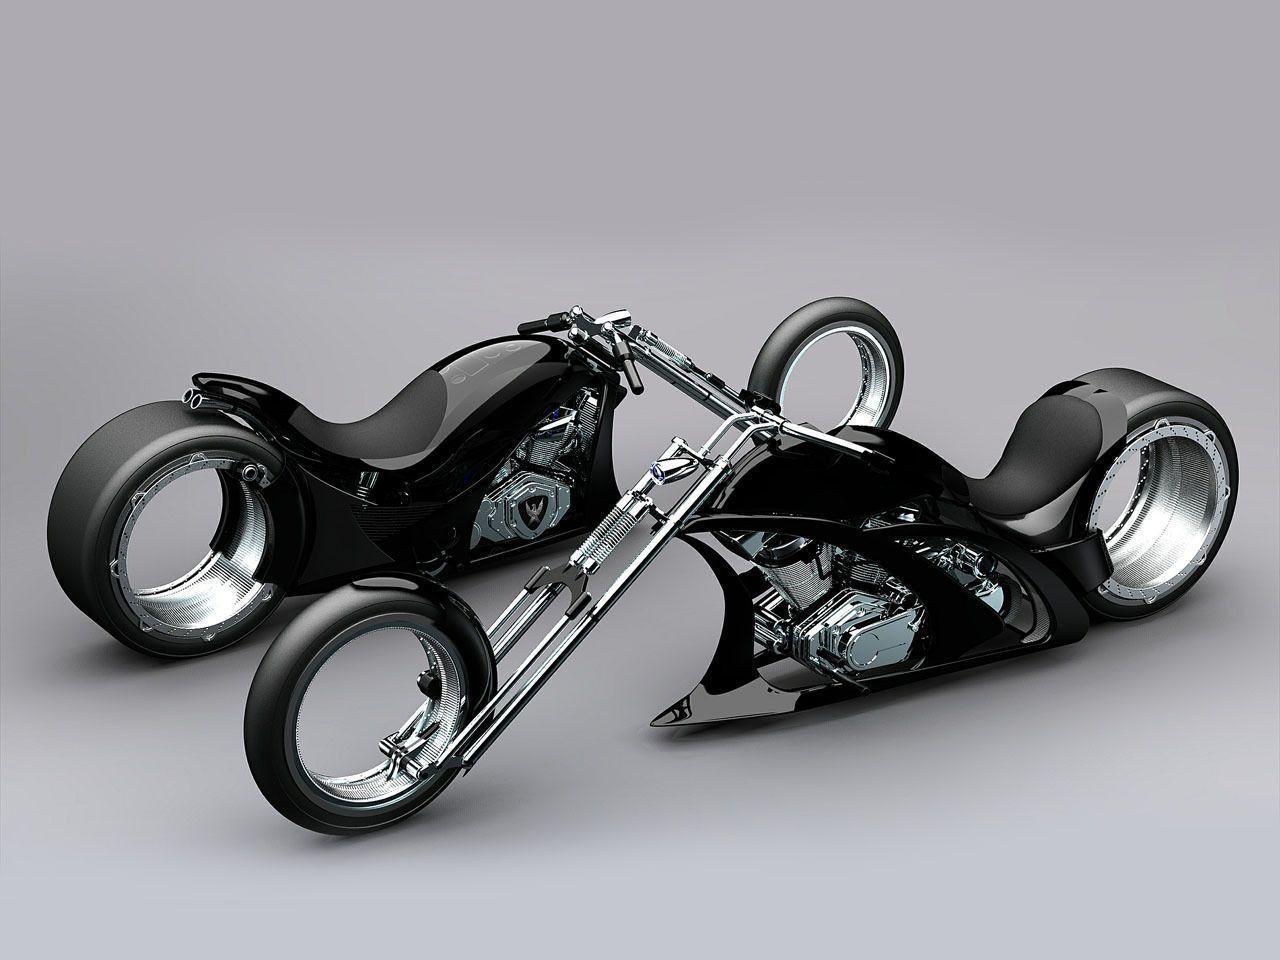 Motorcycles image CUSTOM CHOPPER HD wallpaper and background photo